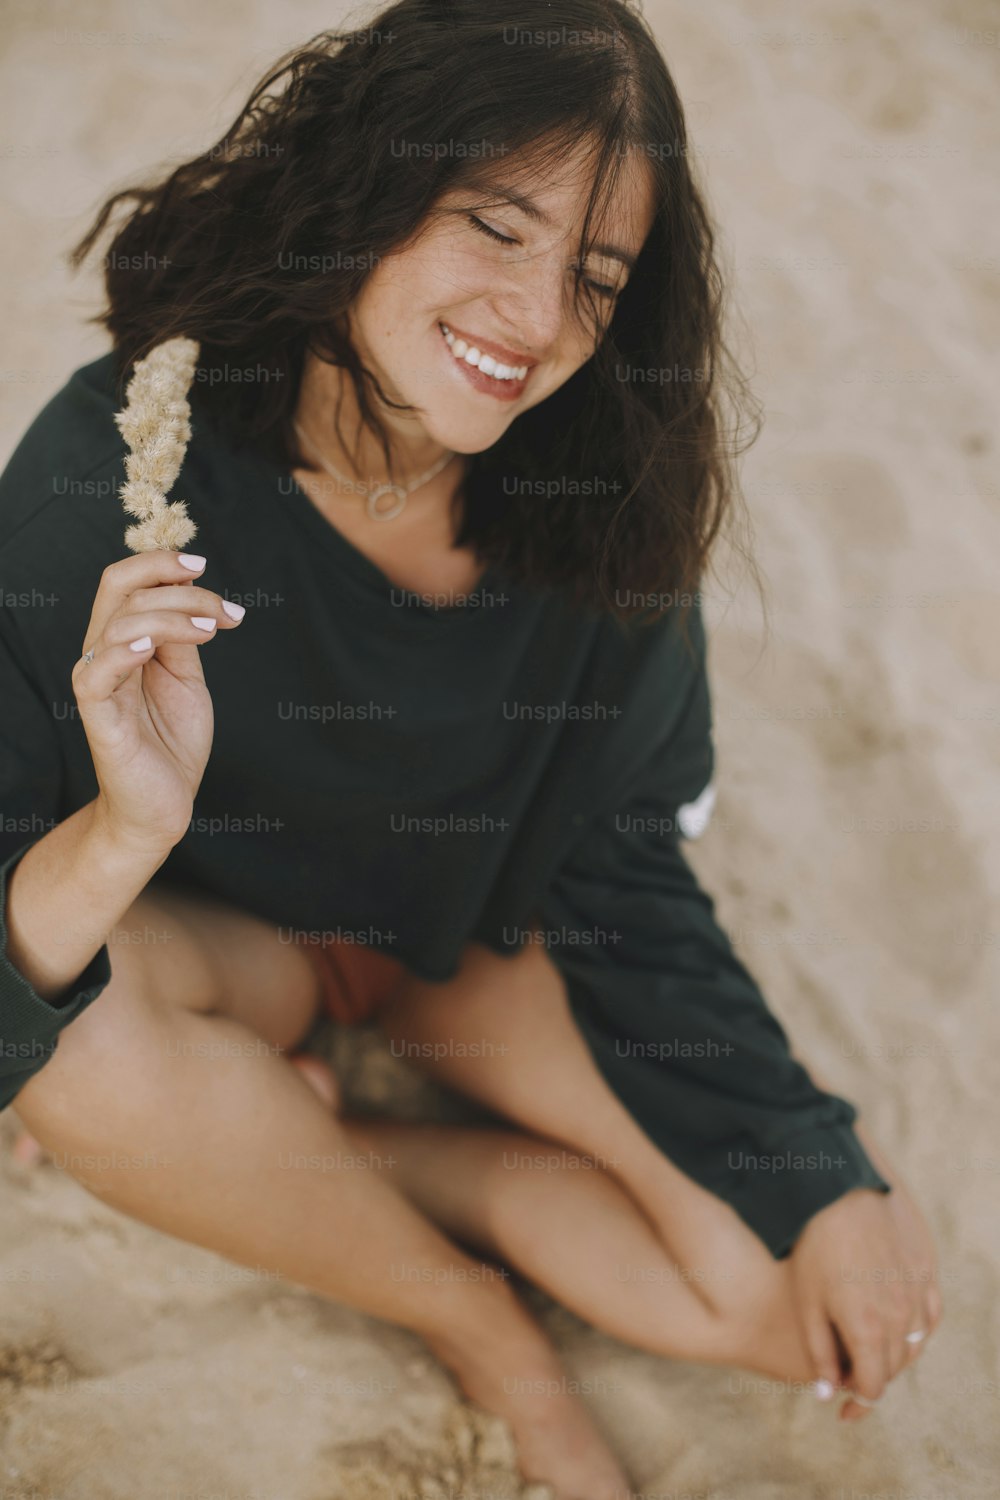 Carefree hipster girl with windy hair sitting and smiling on sandy beach, holding herb. Stylish tanned young woman in modern swimsuit and sweater relaxing on seashore. Summer vacation